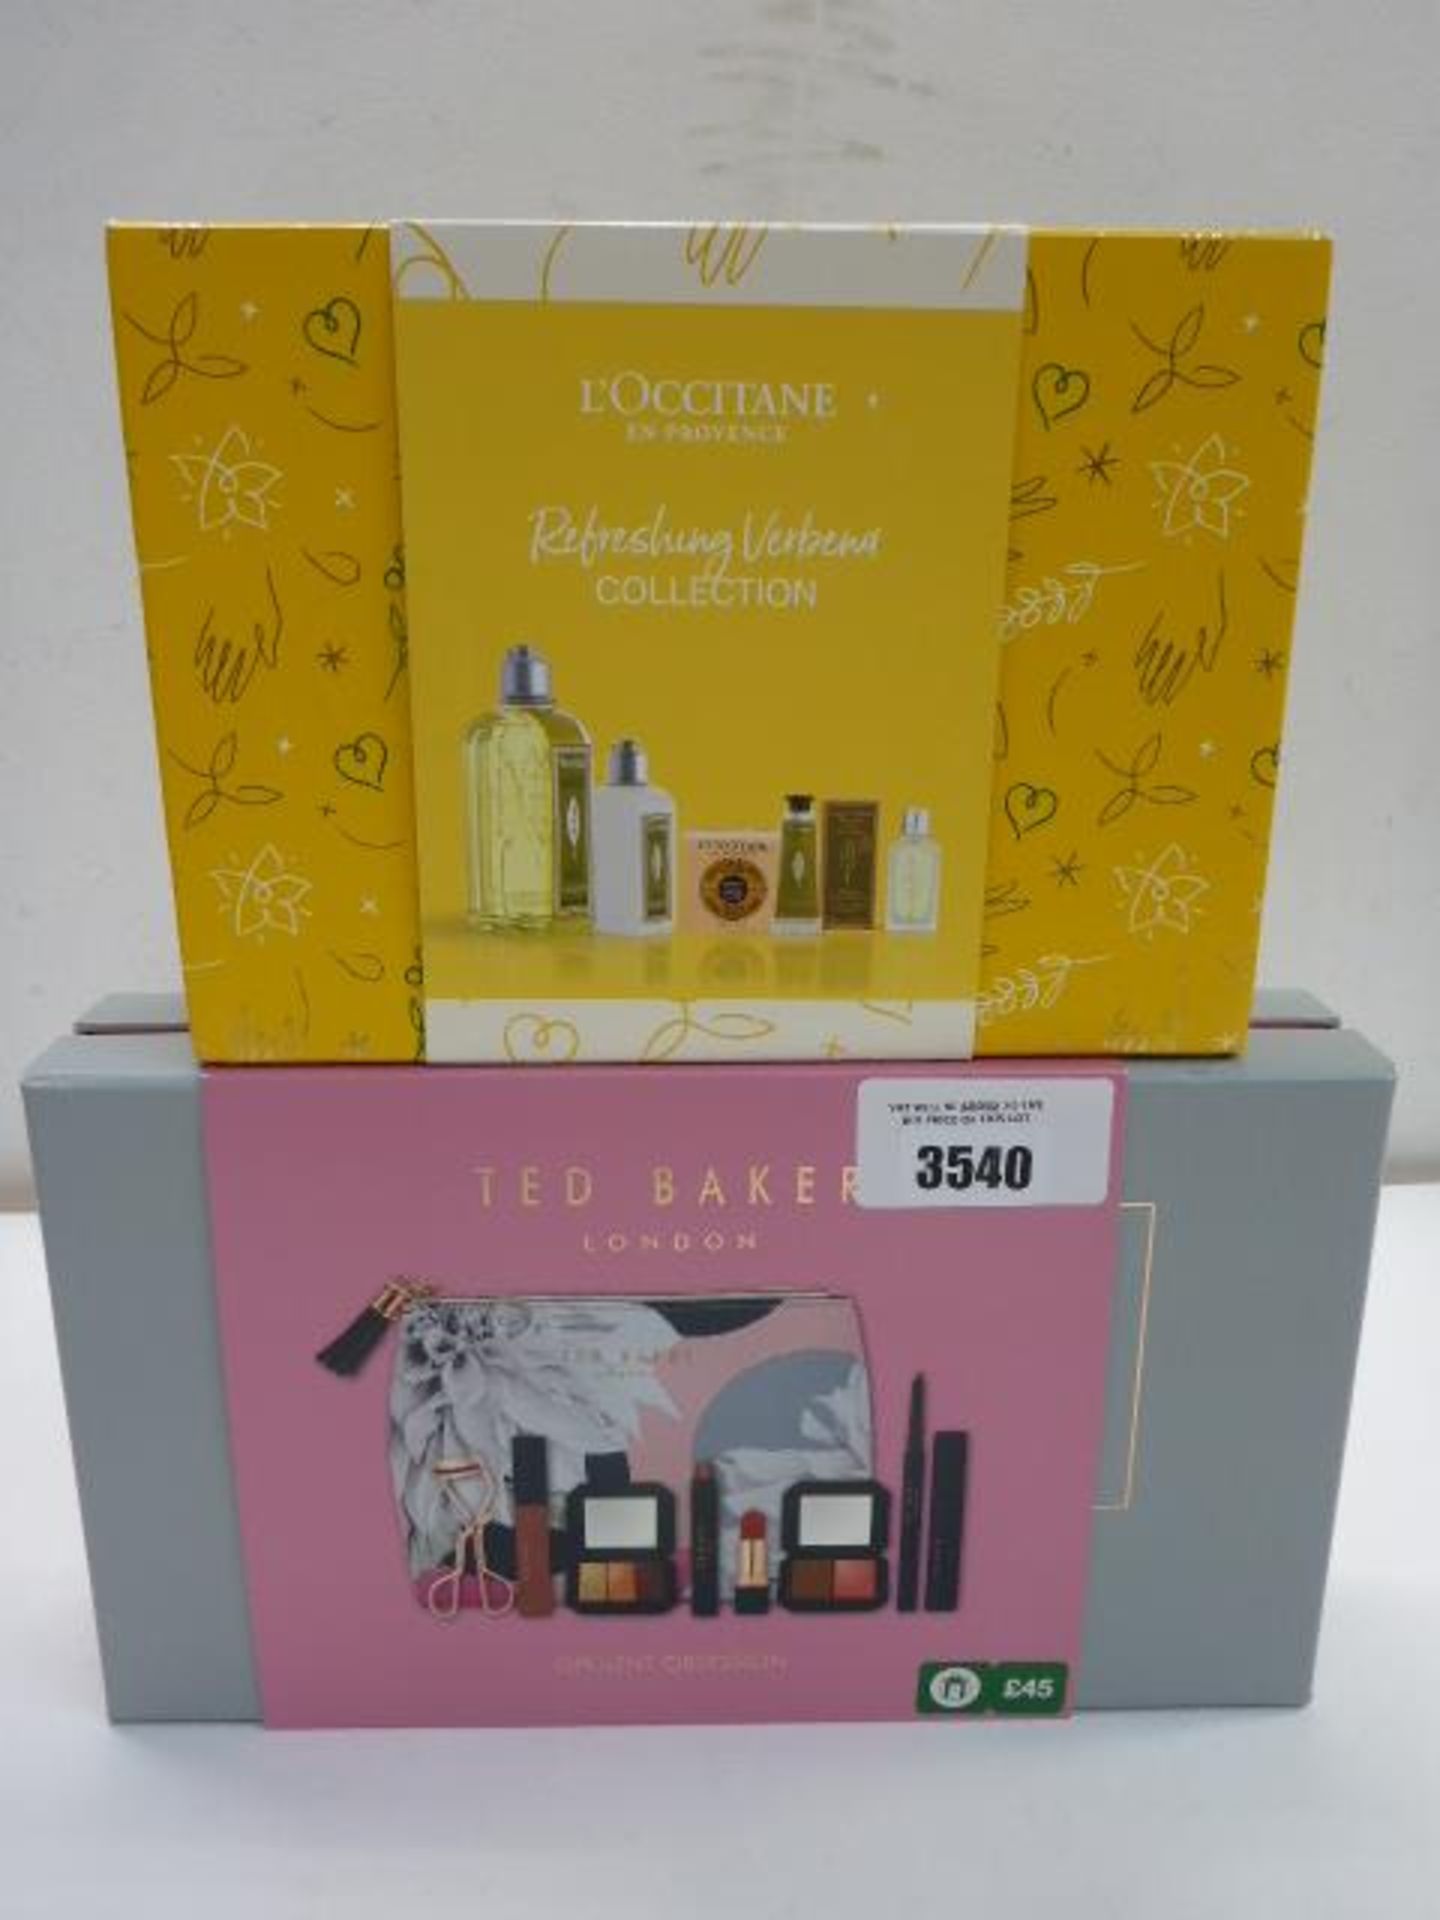 L'Occitane Refreshing Verbena Collection Bodycare Gift Set and Ted Baker Opulent Obsession